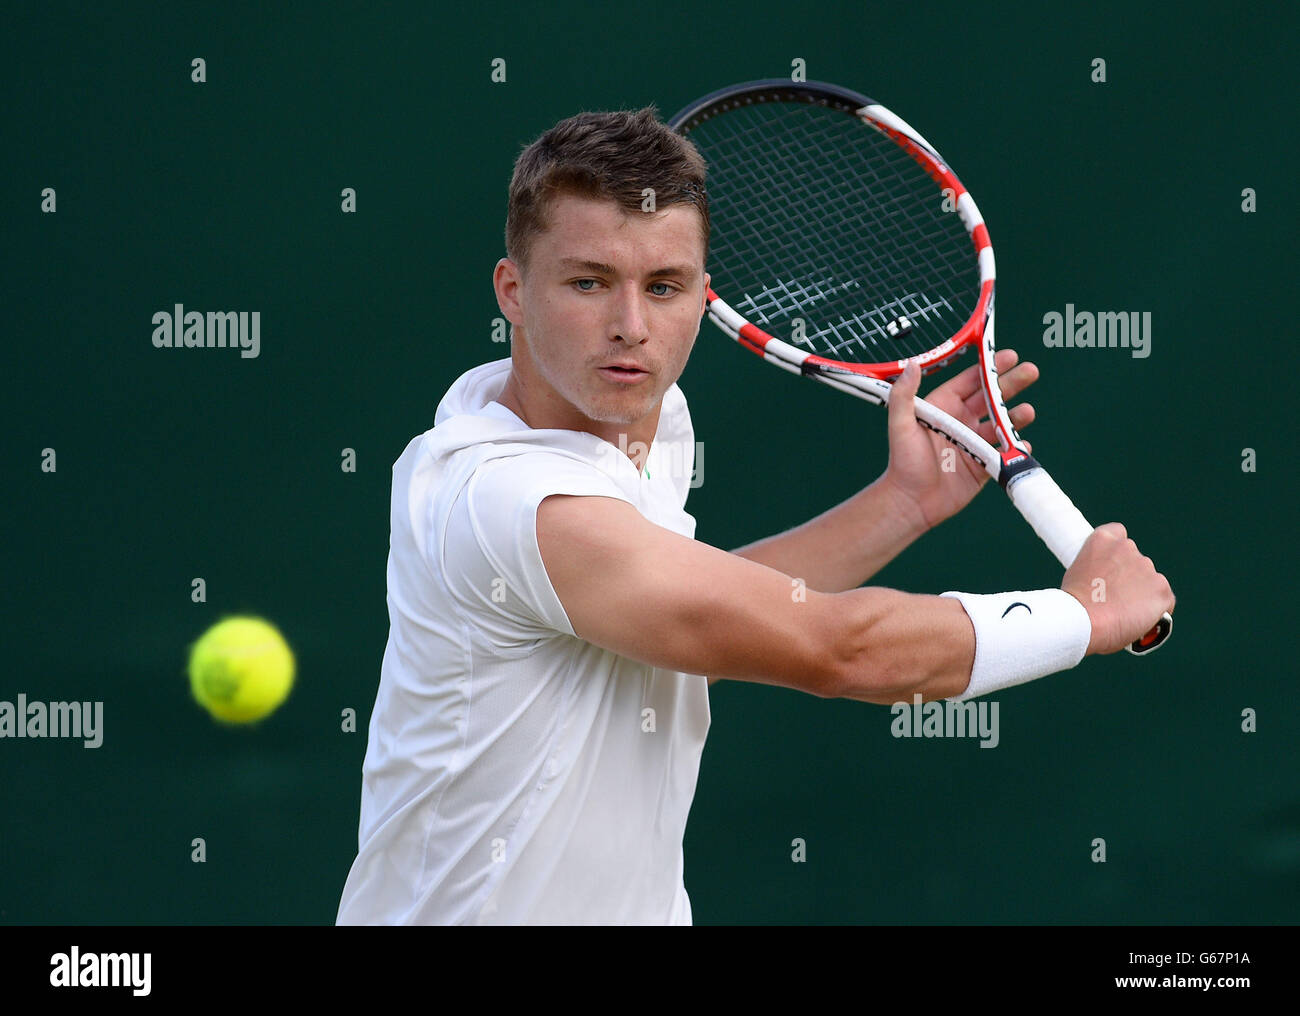 Great Britain's Jonny O'Mara in his Boy's Singles match against France's Maxime Janvier during day seven of the Wimbledon Championships at The All England Lawn Tennis and Croquet Club, Wimbledon. Stock Photo